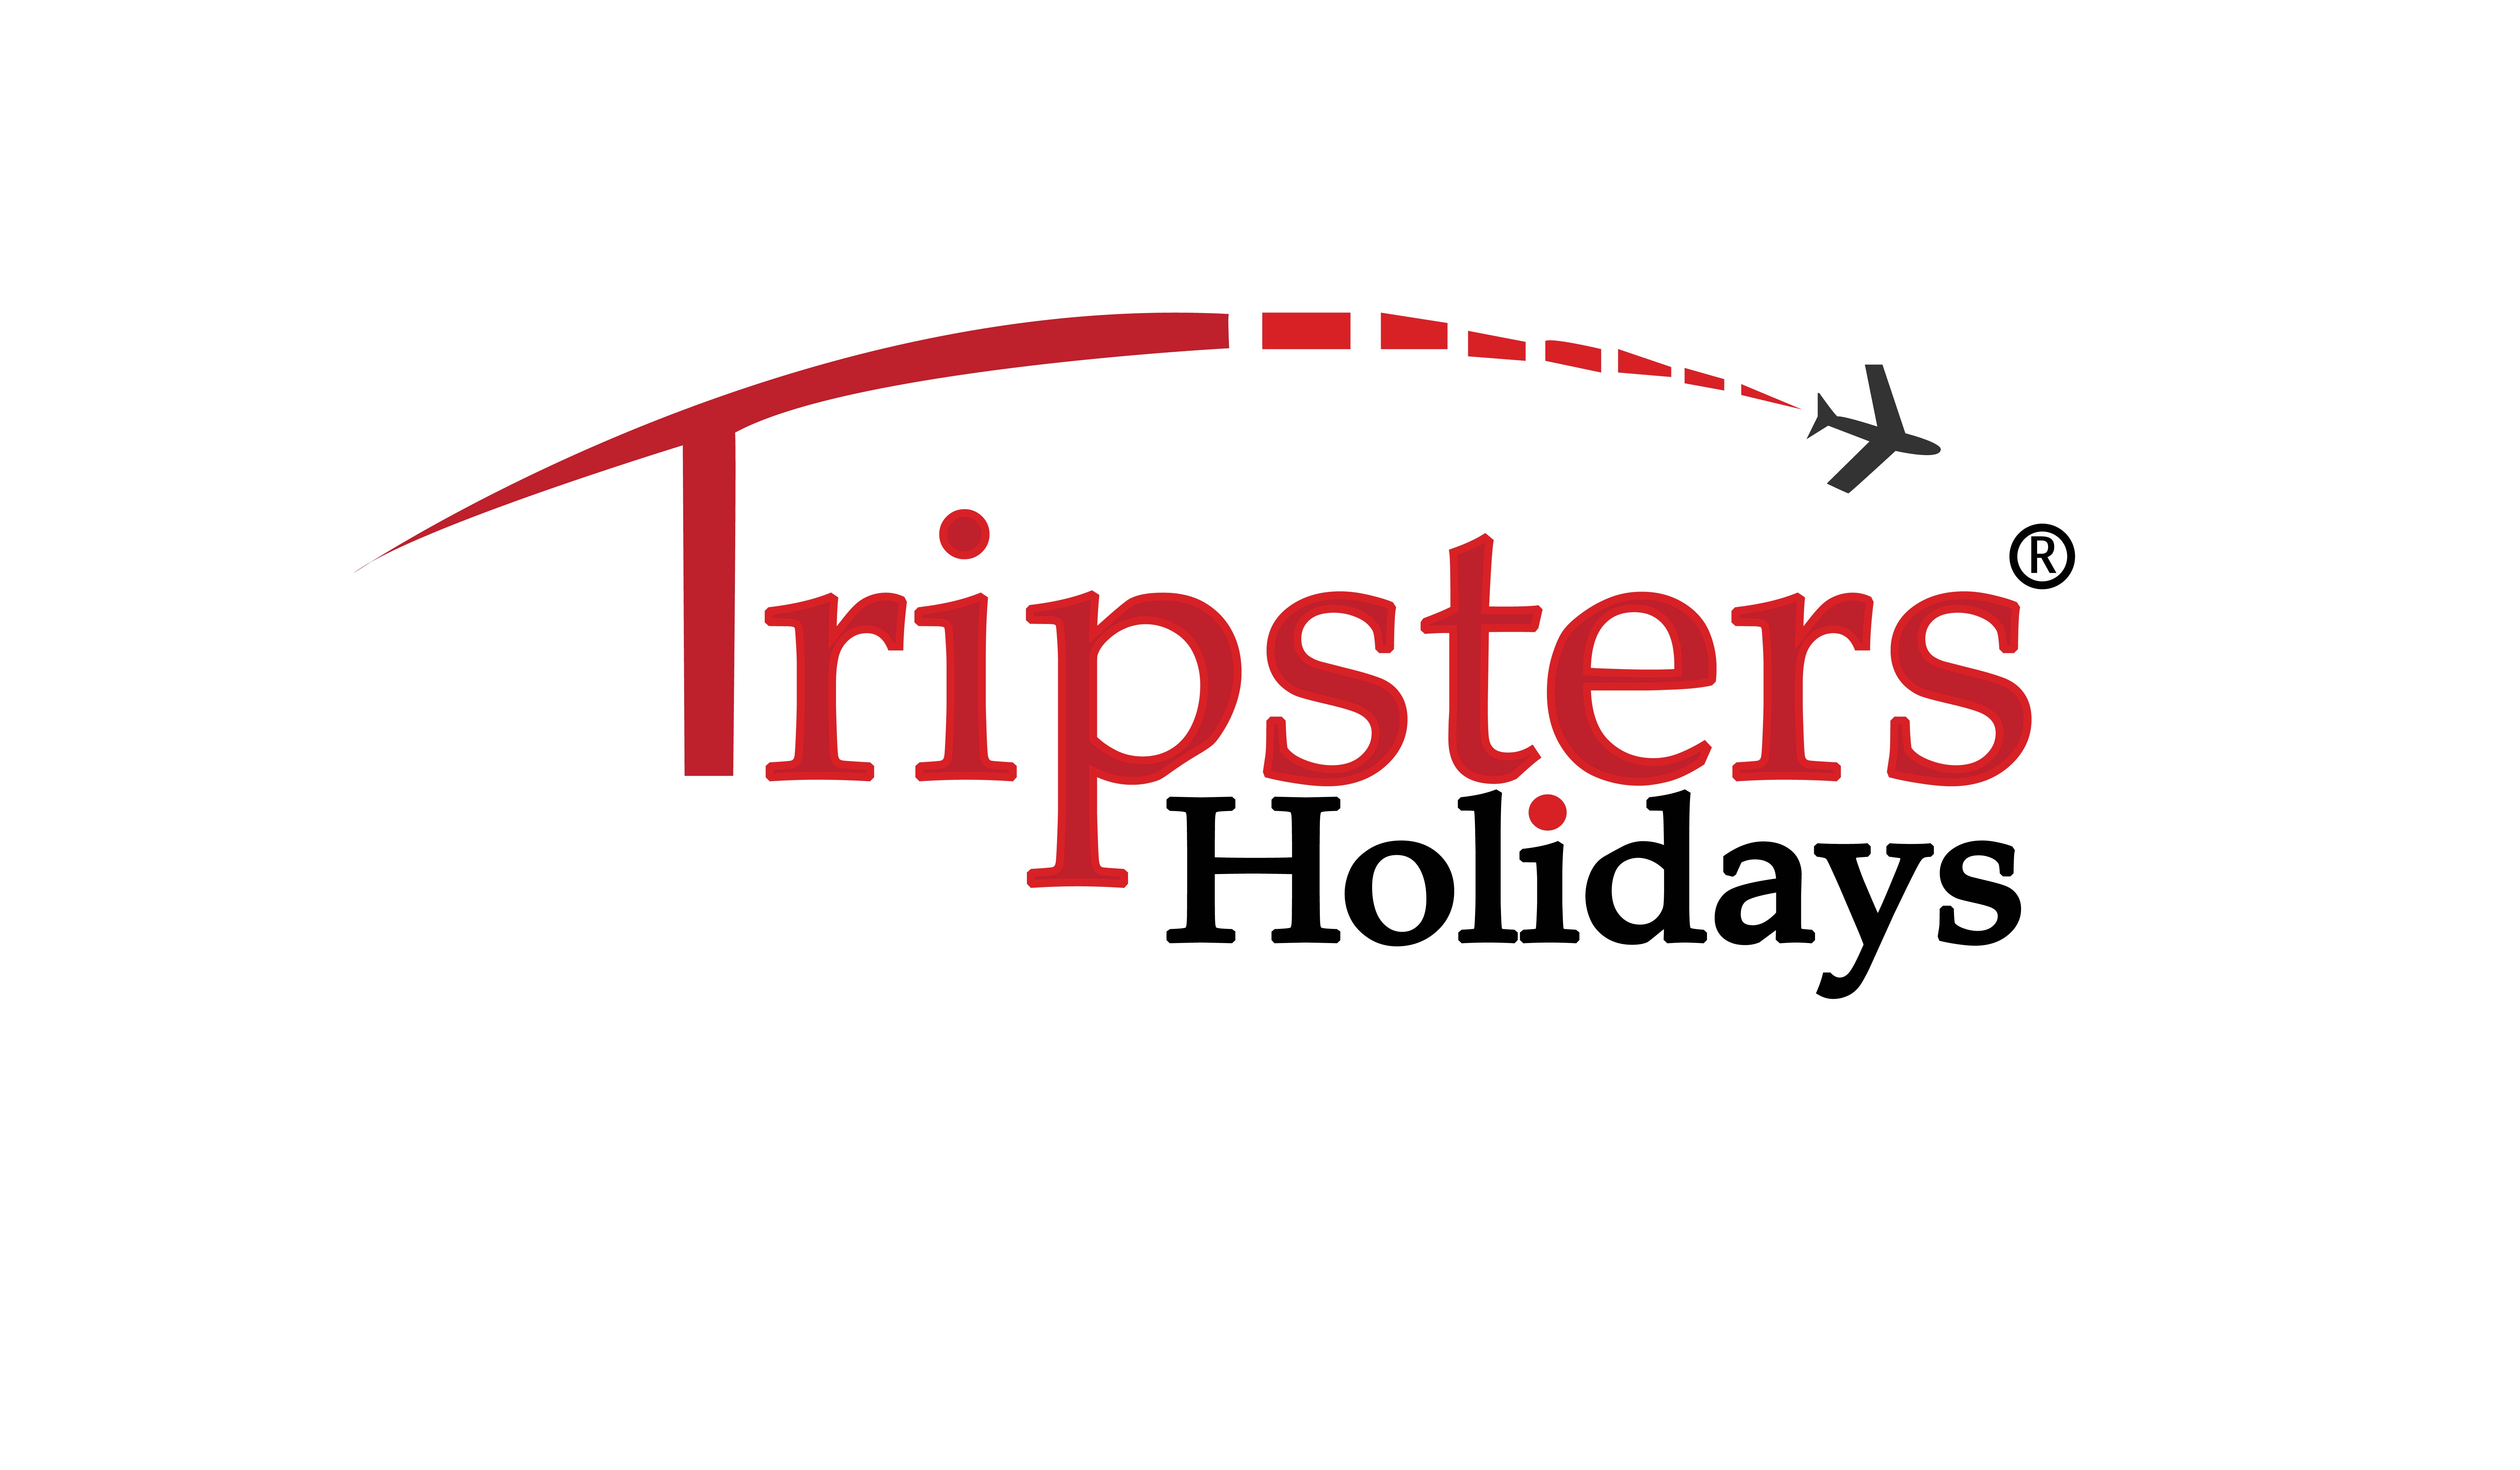 Tripsters